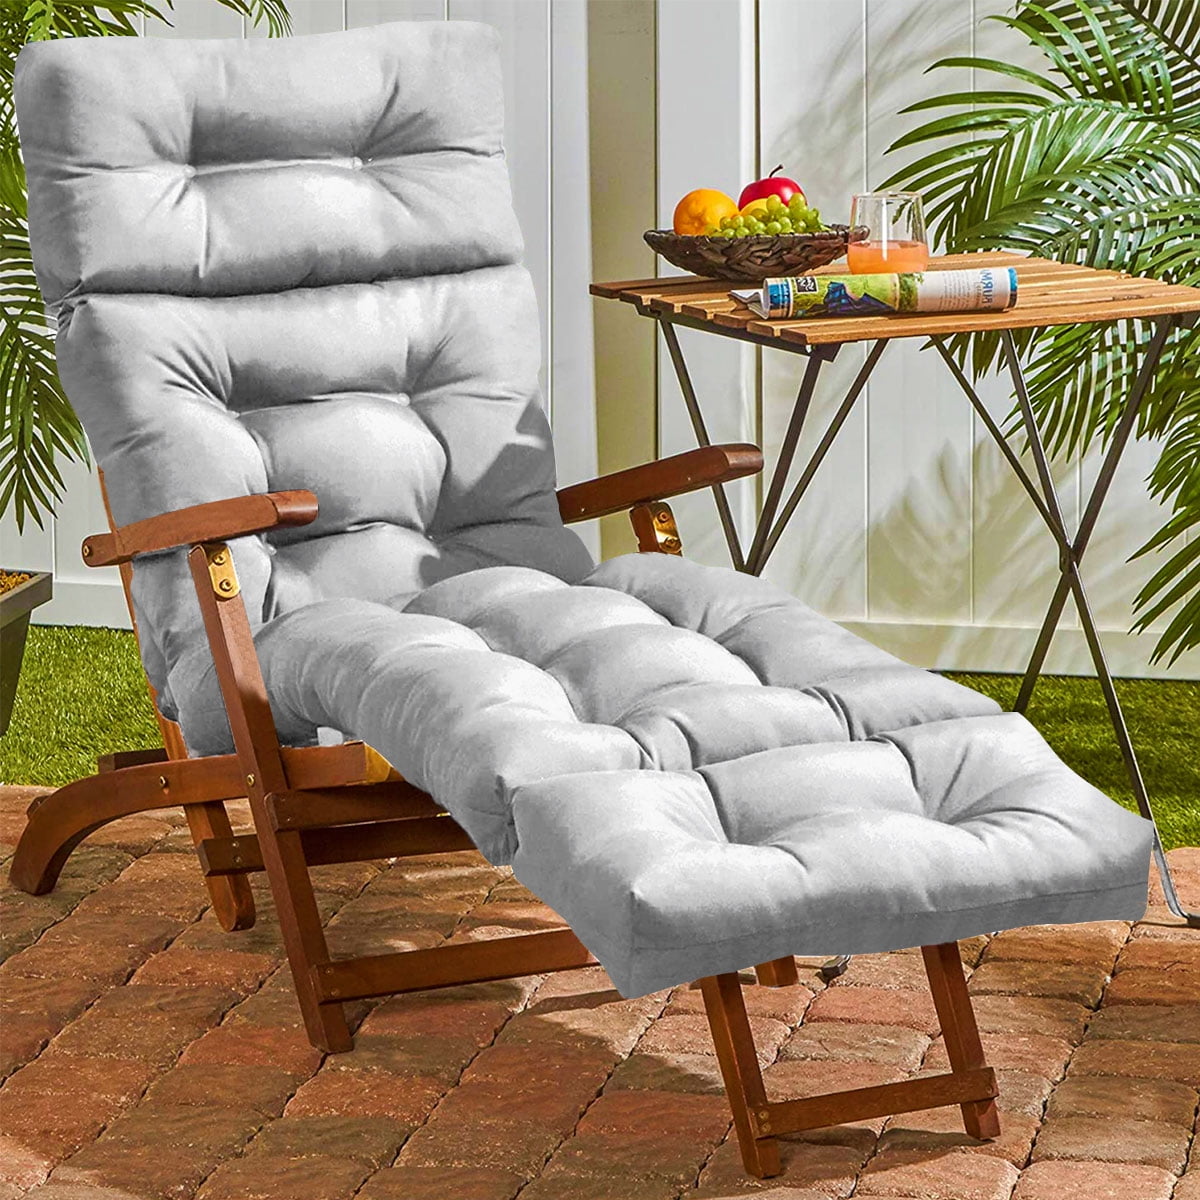 Pad Fleece Lounge Chair Cushion for Travel Holiday Indoor Outdoor-Beige Relaxer Bench Seat Cover Portable Garden Patio Thick Padded YBing Sun Lounger Cushions